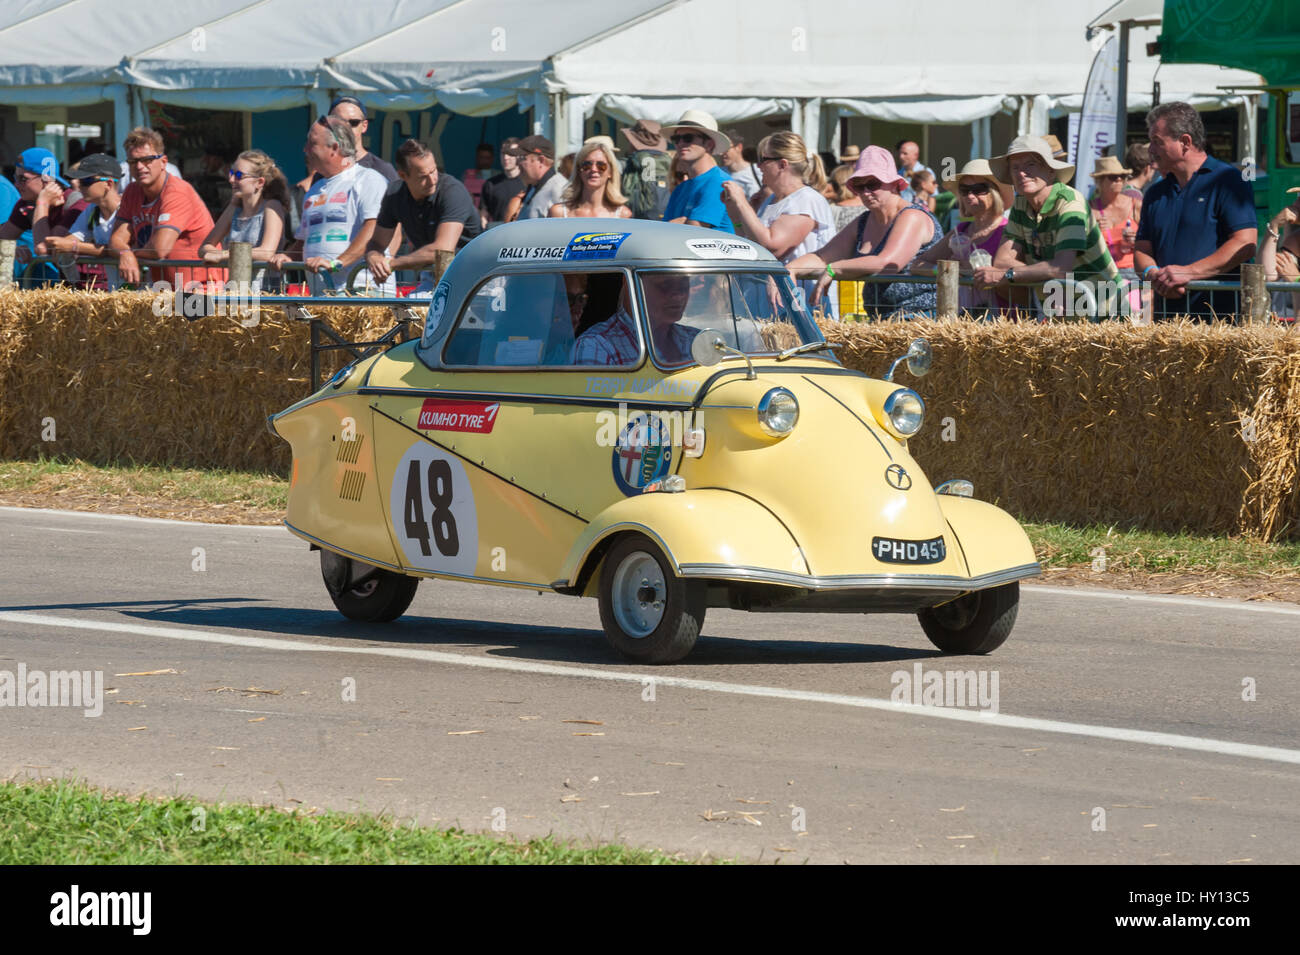 Laverstoke, Hampshire, UK - August 25, 2016: Terry Maynard driving a vintage Messerschmitt KR20 bubble-car at the CarFest motoring event in Laverstoke Stock Photo